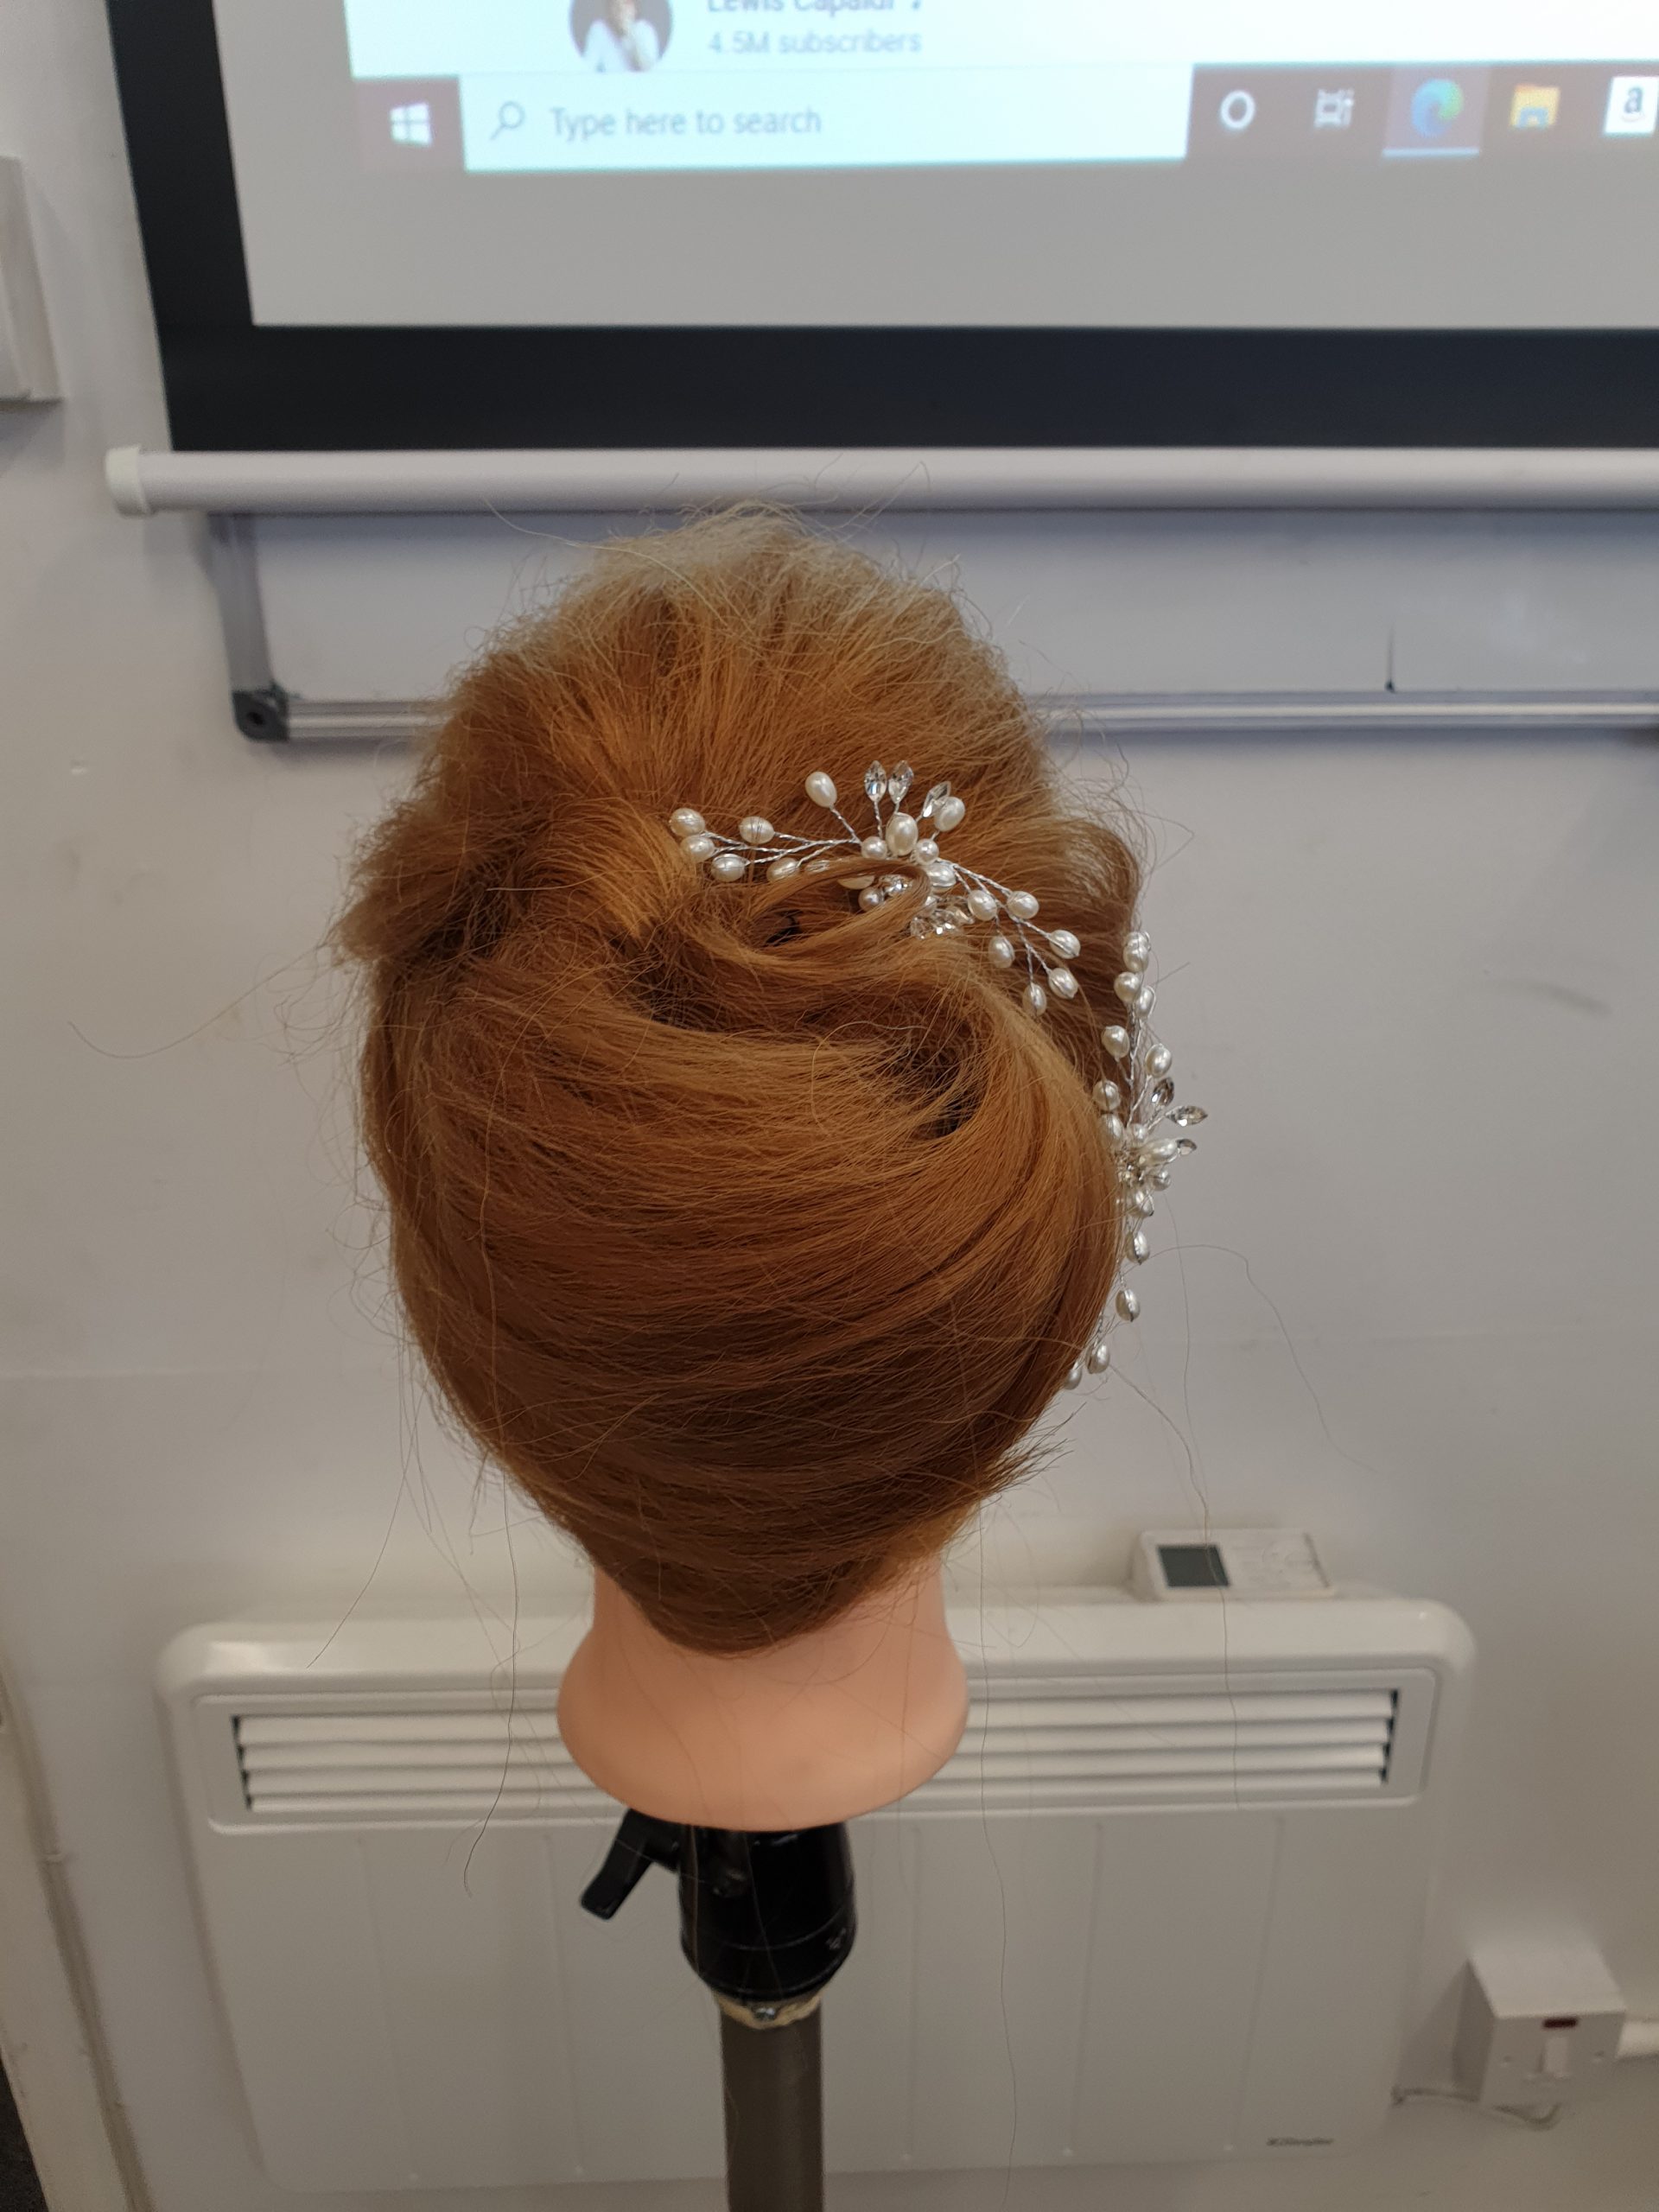 Hair Styling-Hair up Course - ALLSKINS Training Academy